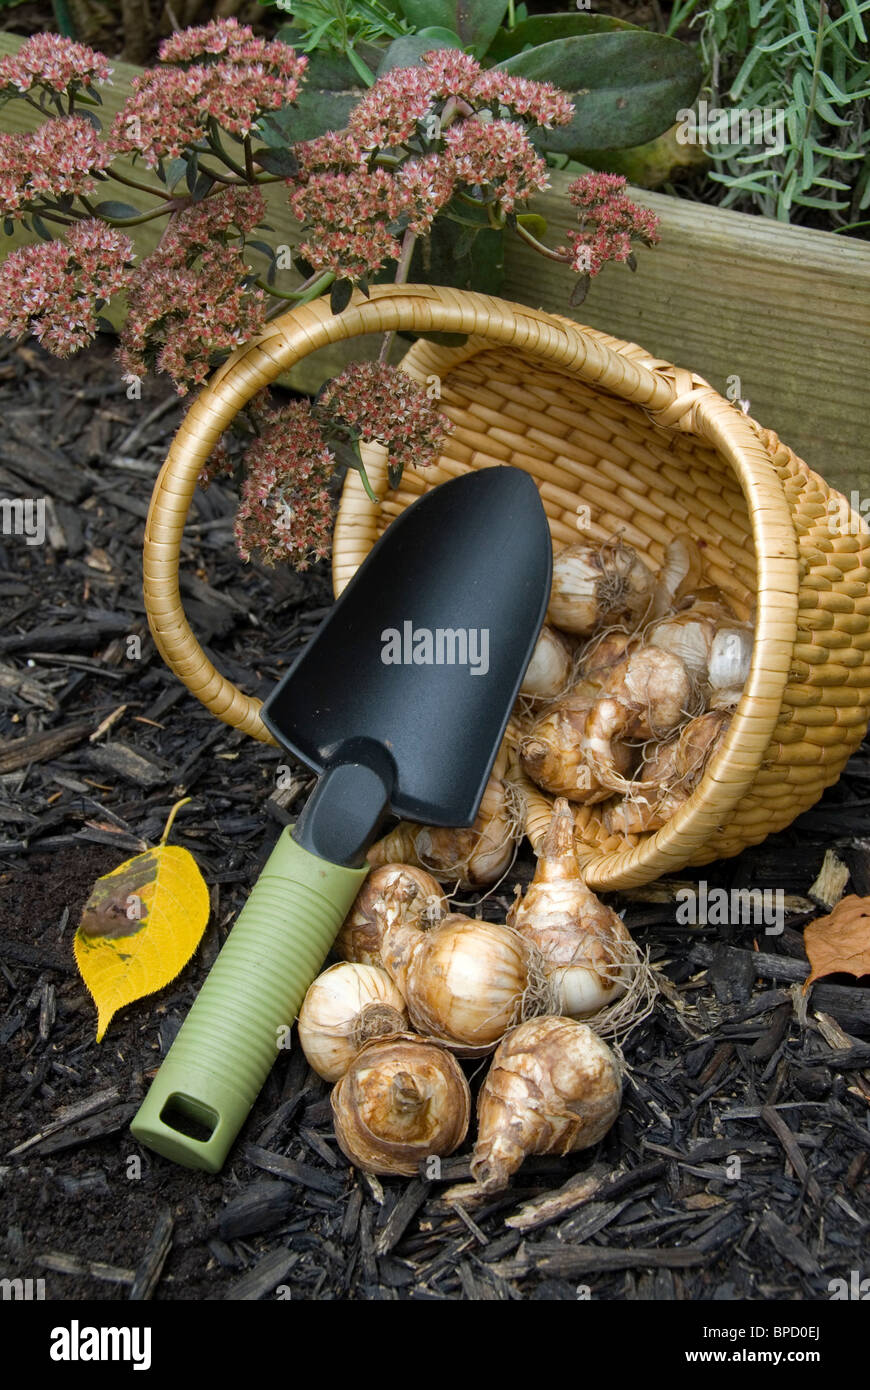 Planting daffodils in the garden in autumn fall, with basket of bulbs, trowel, fall leaves, sedum plant flowers chores working Stock Photo